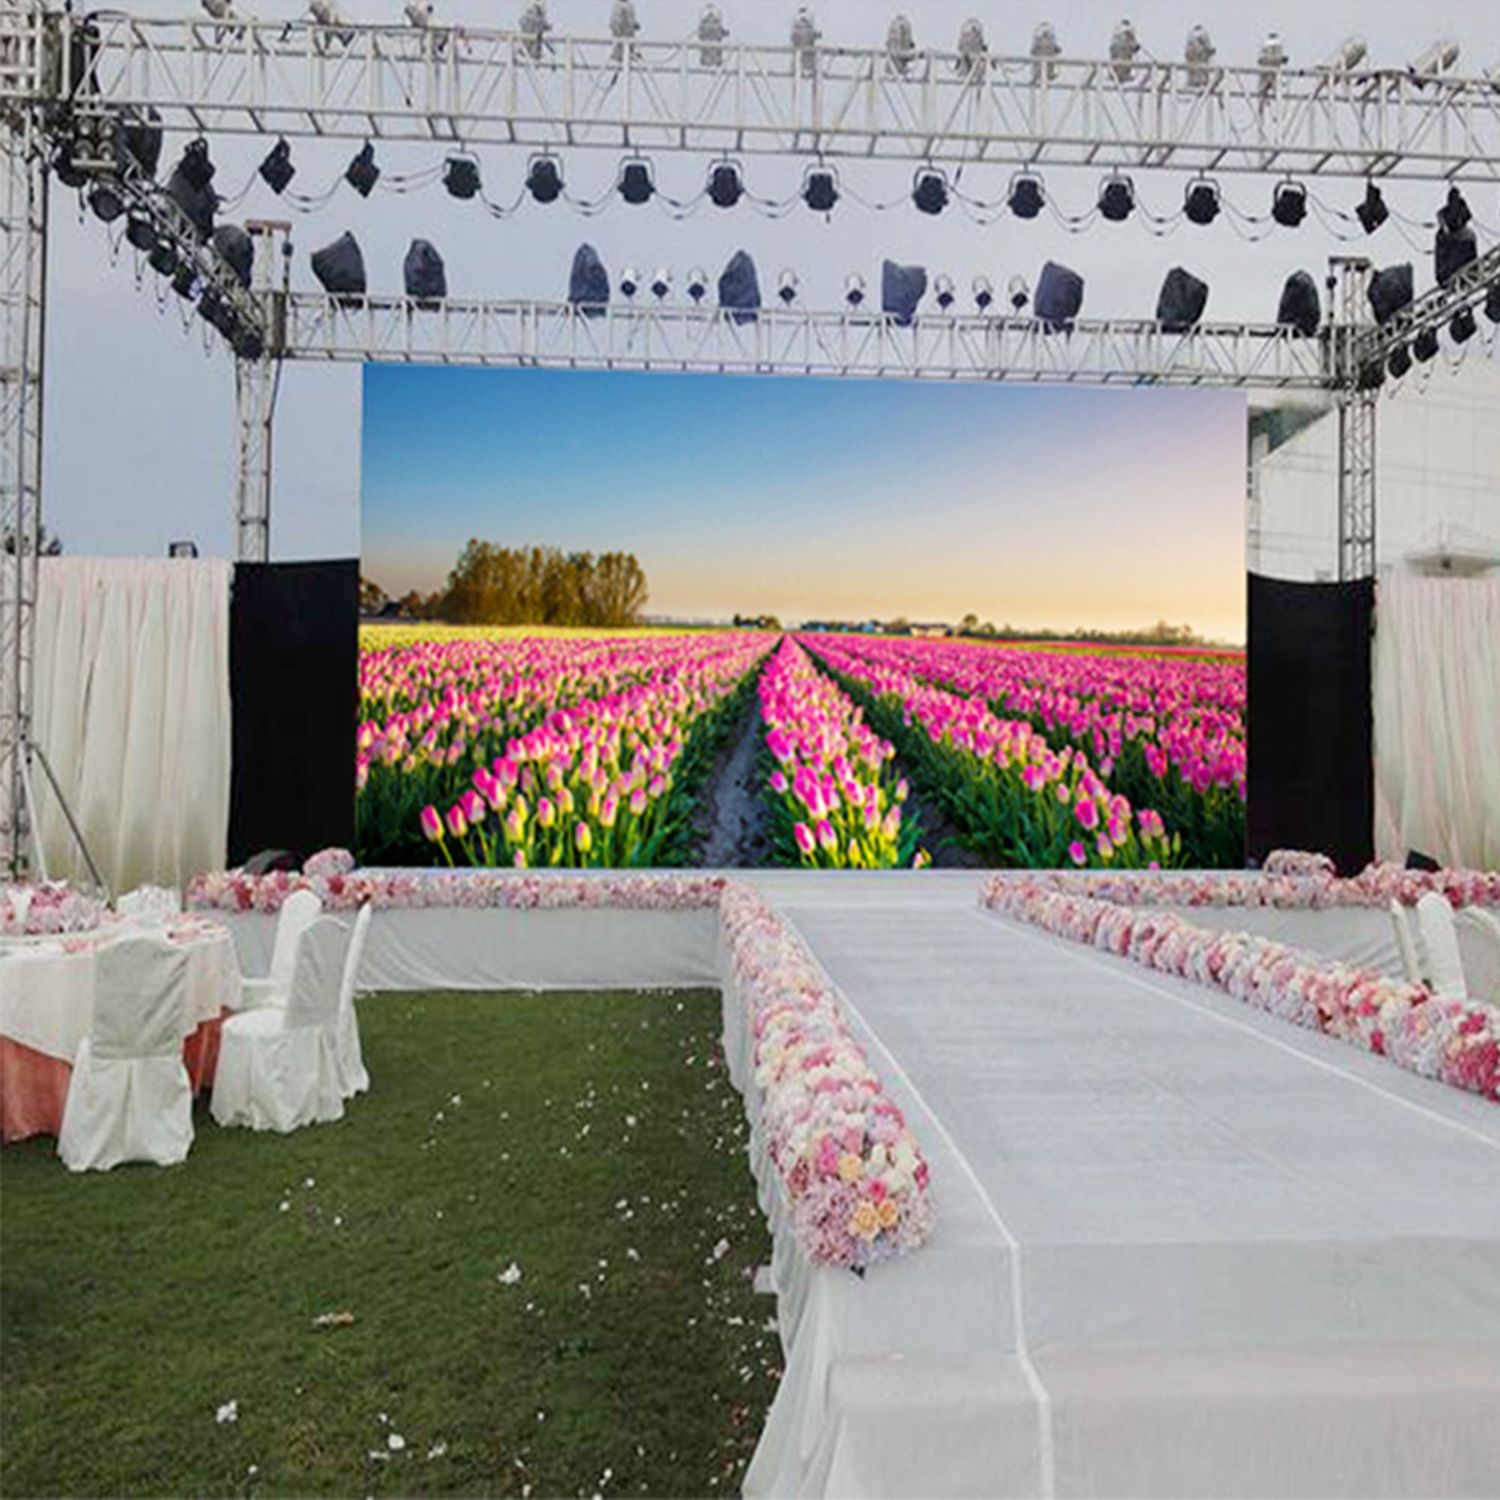 A portable LED display screen with a lush tulip field image